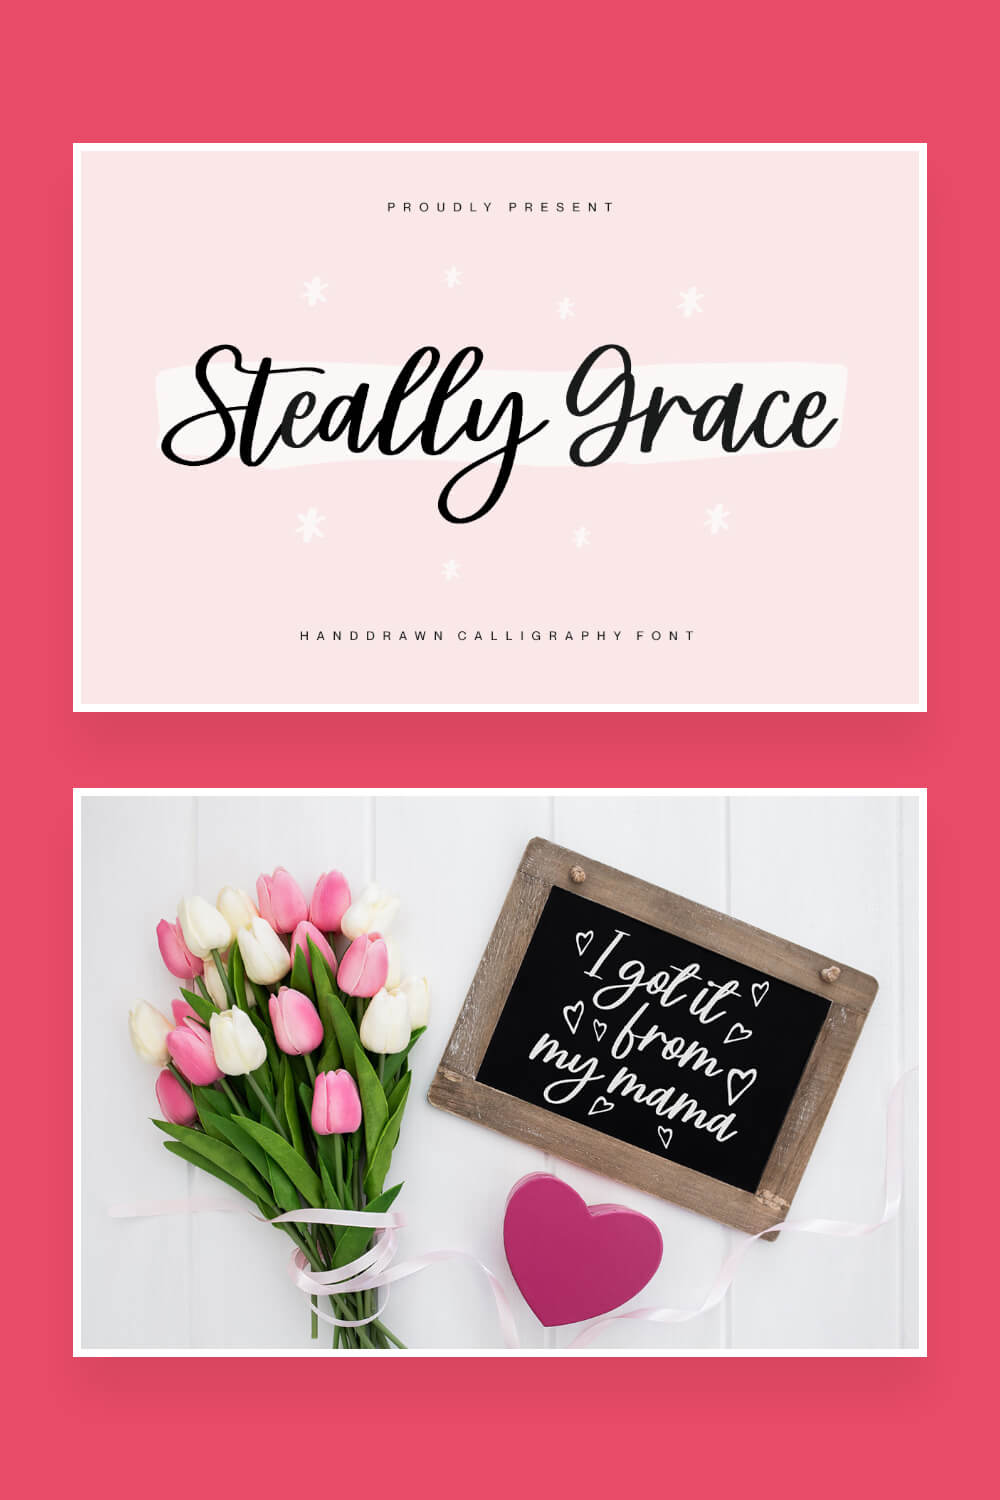 steally grace handdrawn calligraphy font pinterest image.